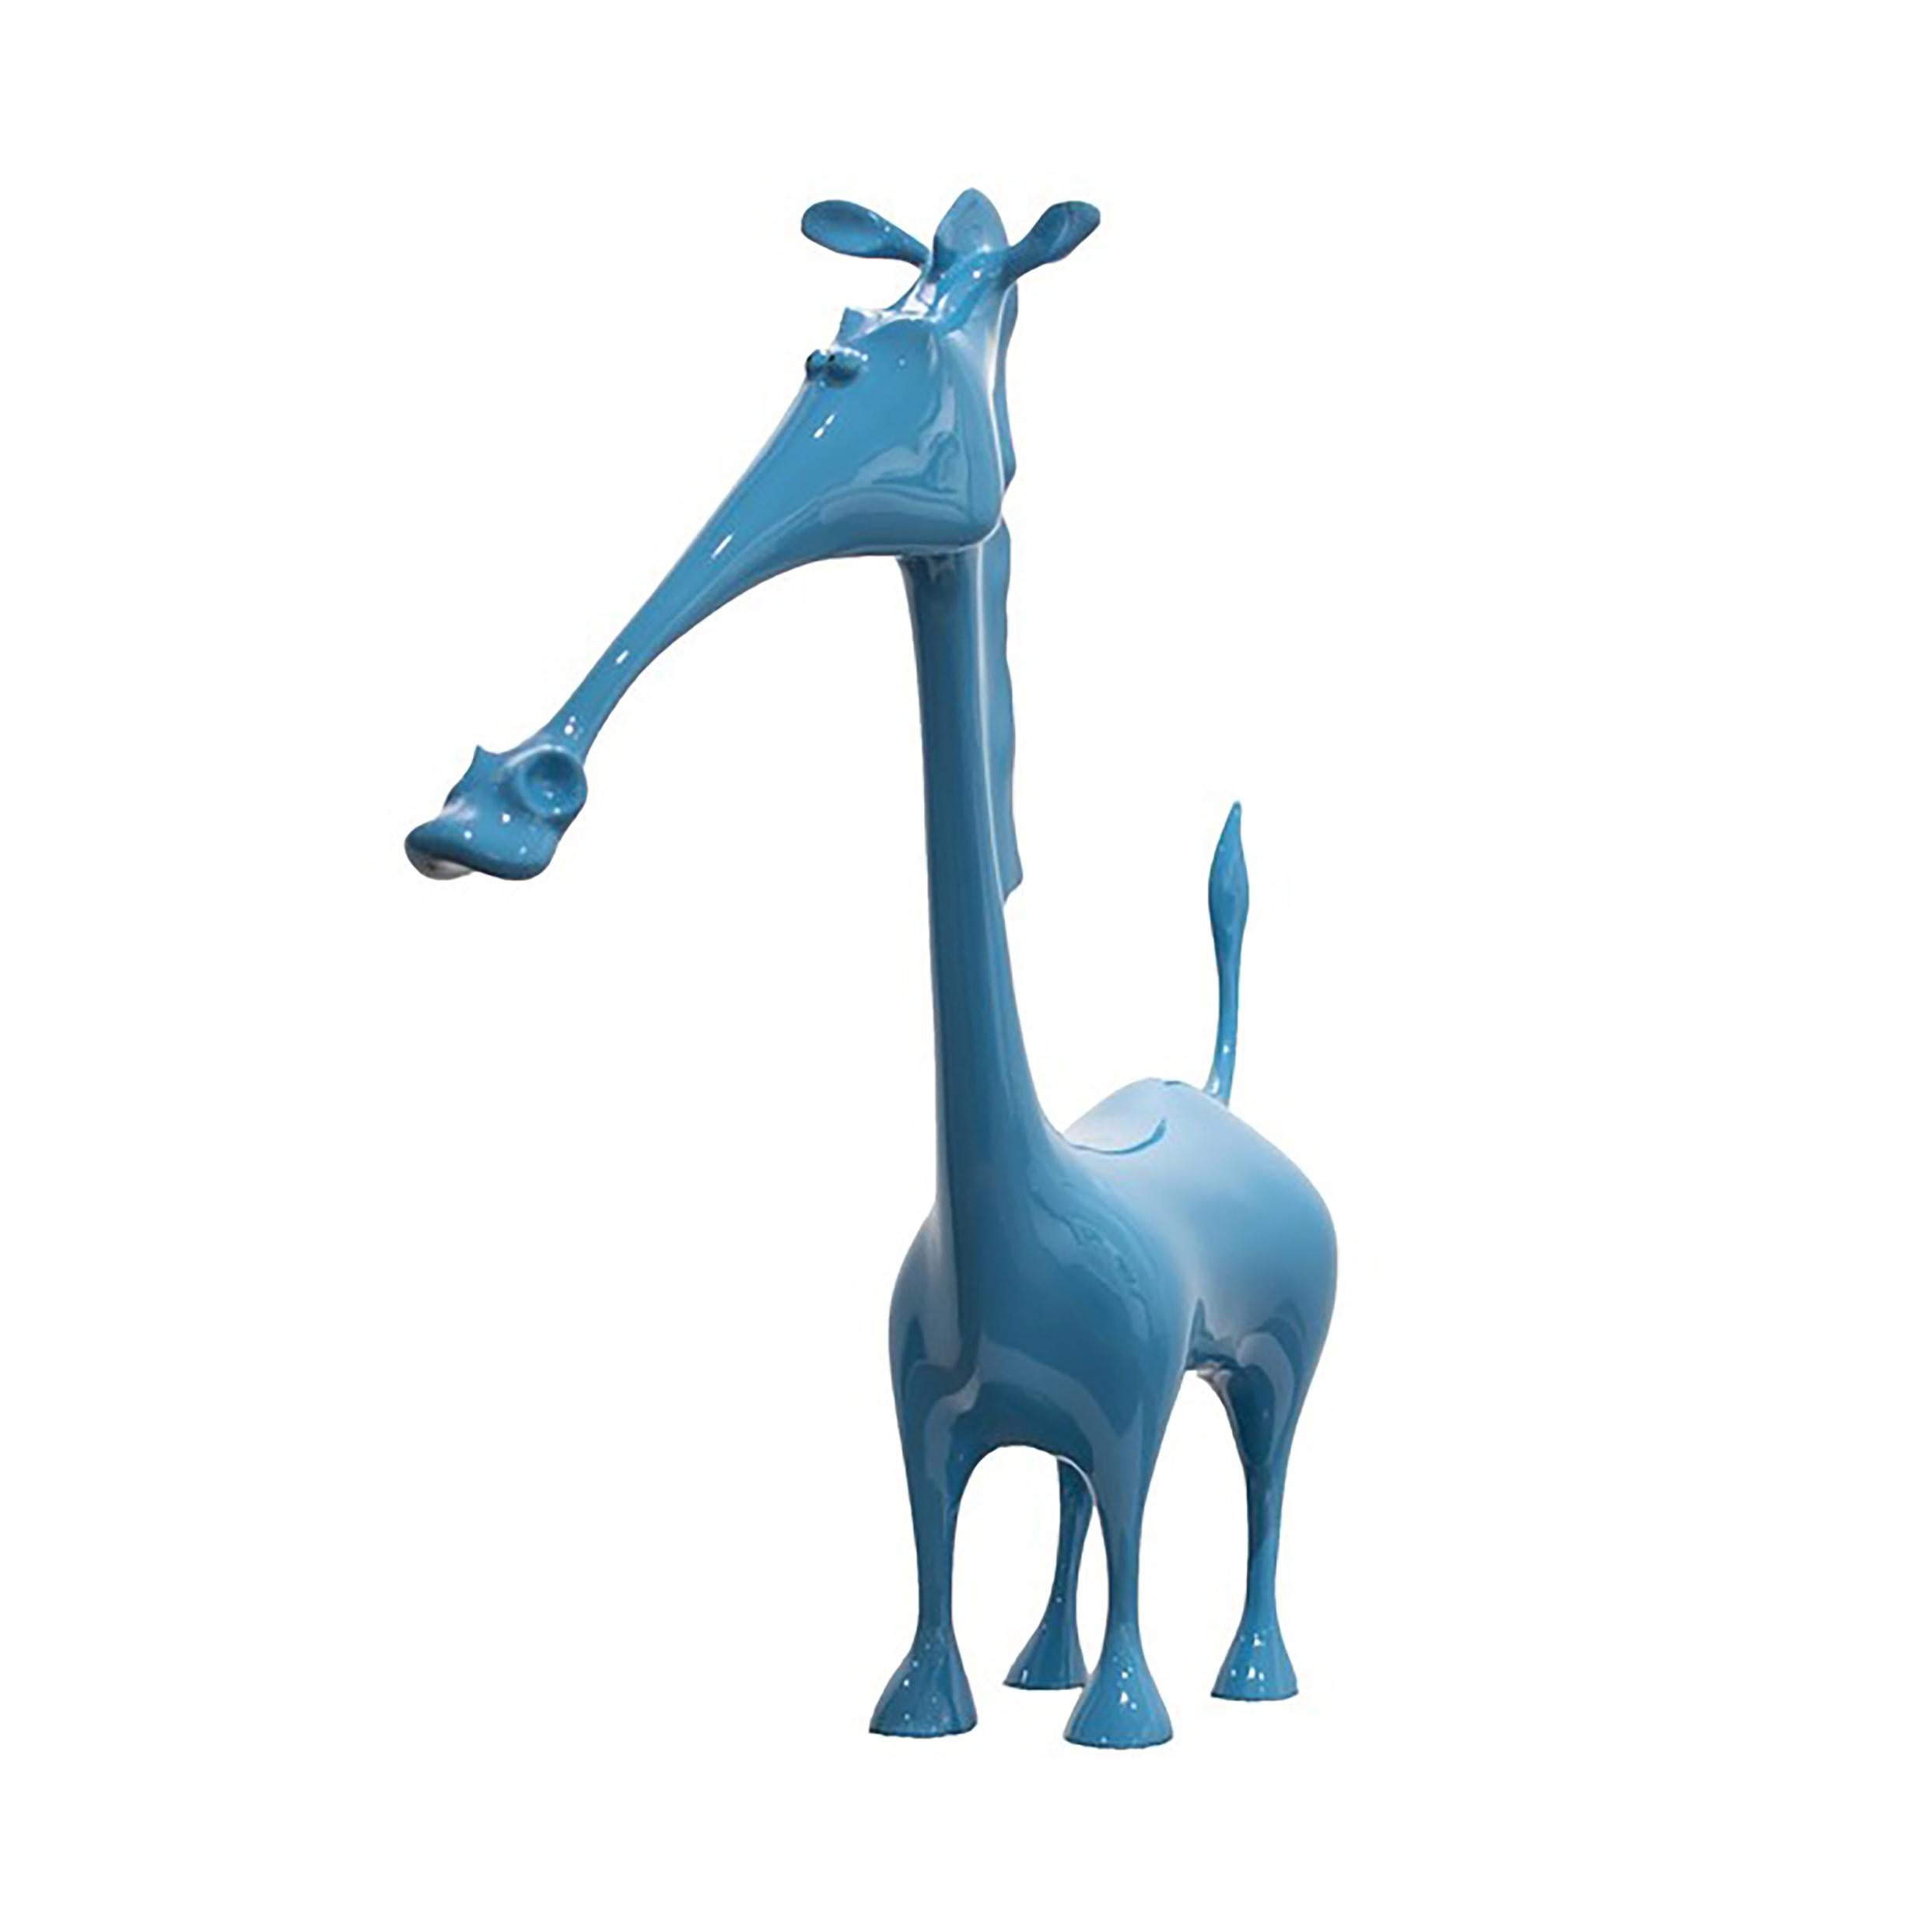 Zou Liang Figurative Sculpture - Horse Sculpture in Blue. Temporarily sold out. Pre-order is available.